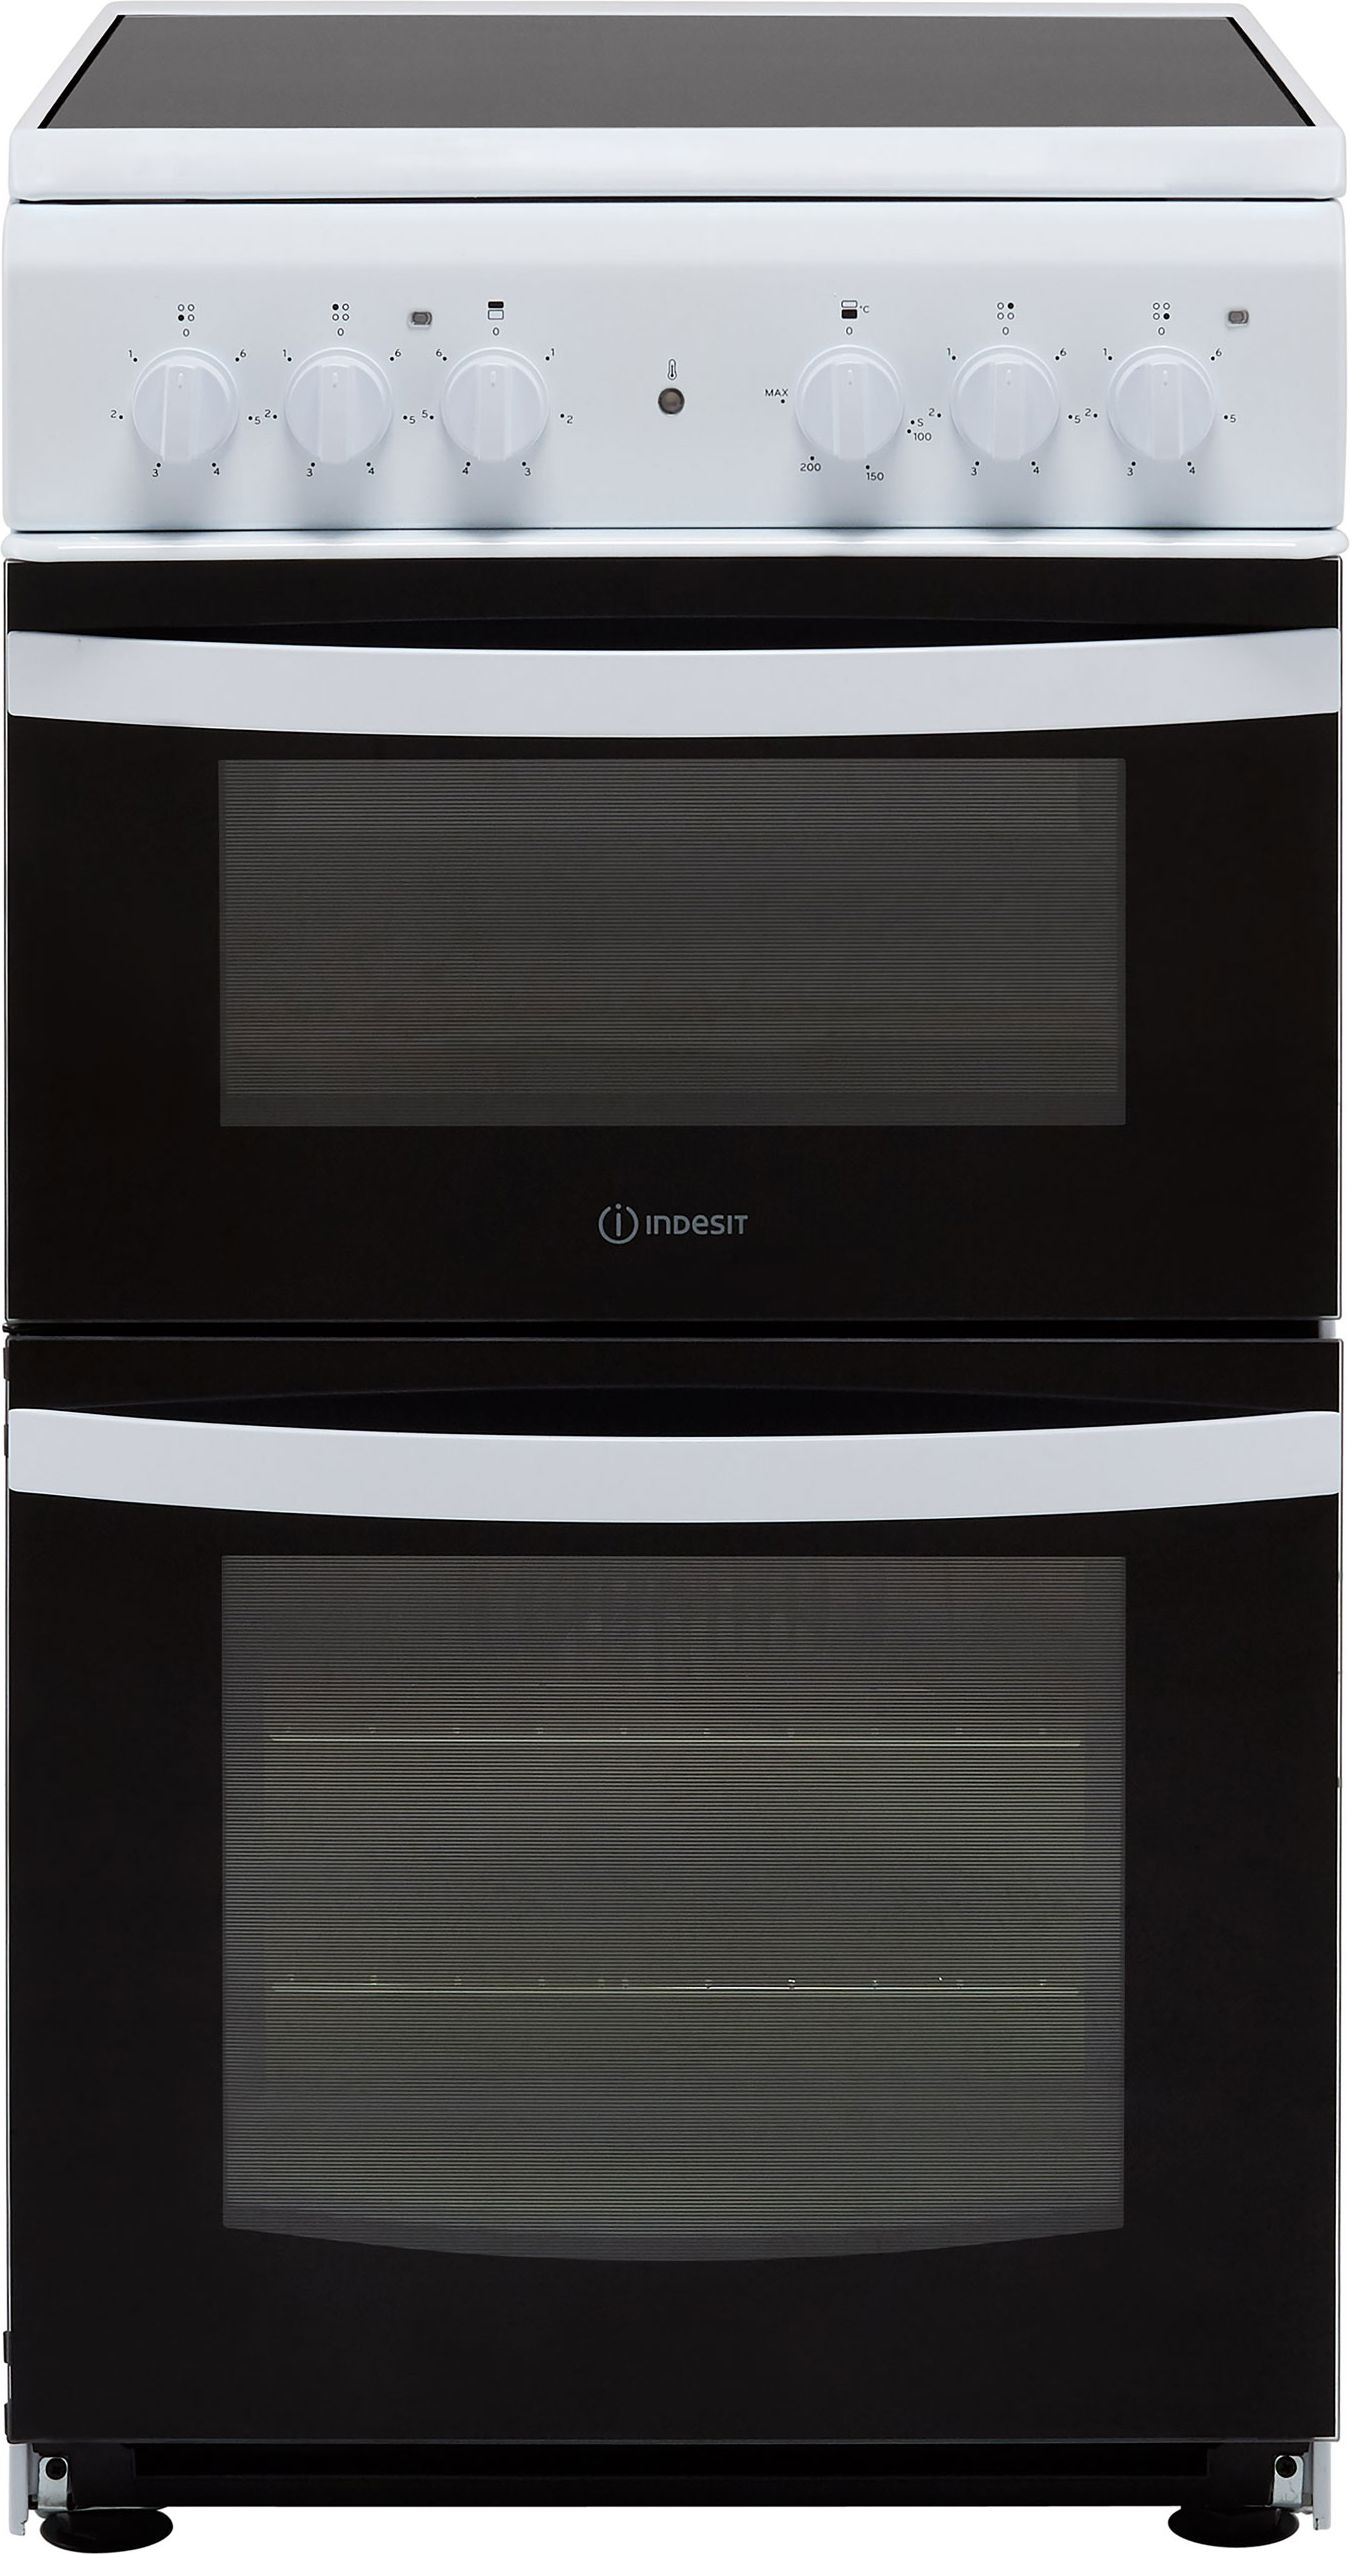 Indesit Cloe ID5V92KMW 50cm Electric Cooker with Ceramic Hob - White - A Rated, White